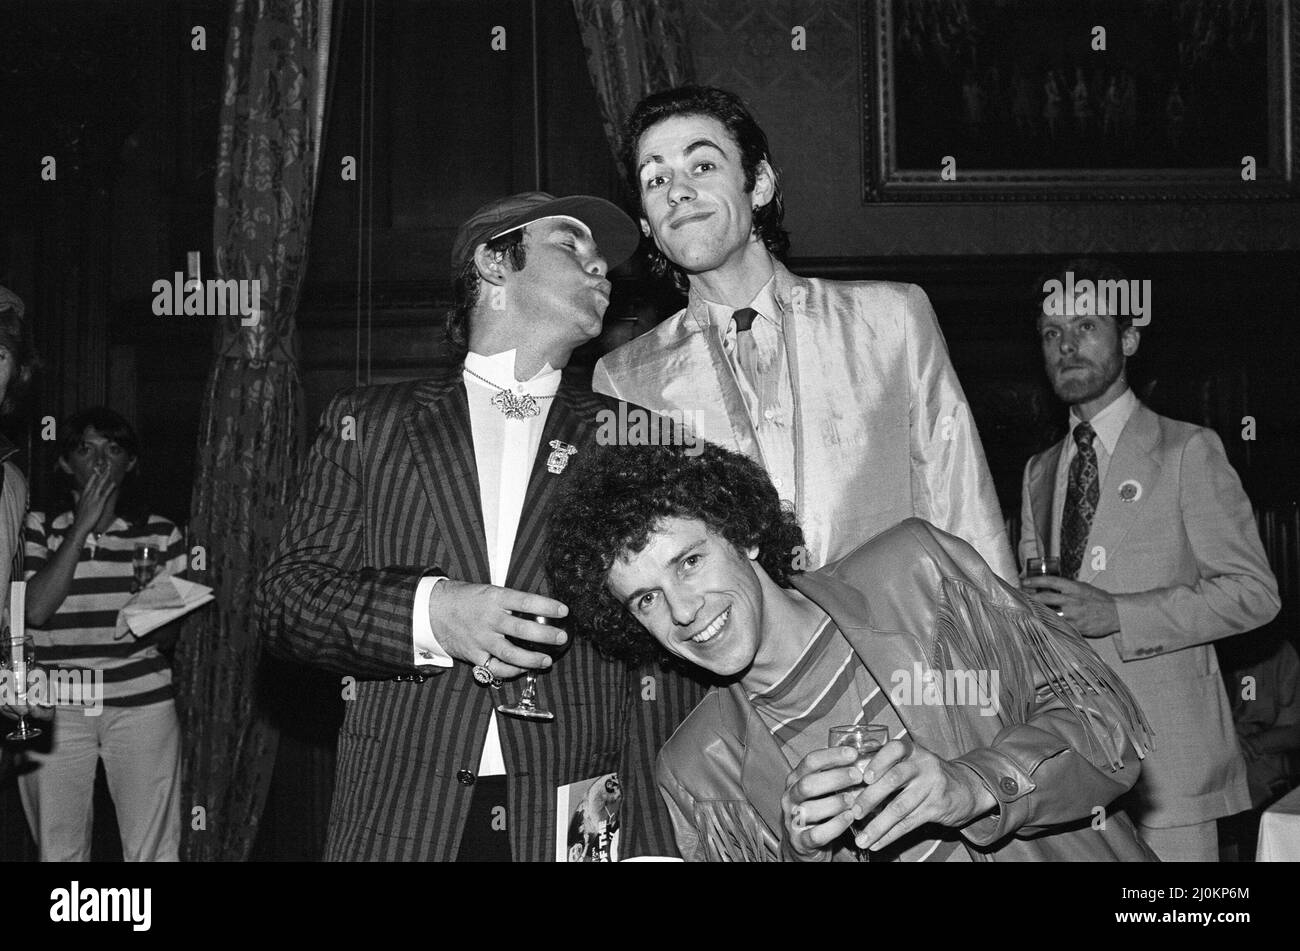 Elton John, Bob Geldof and Leo Sayer attending a House of Commons reception, invited along with other pop stars by the Minister for the Arts, Norman St John-Stevas. 3rd August 1980. Stock Photo